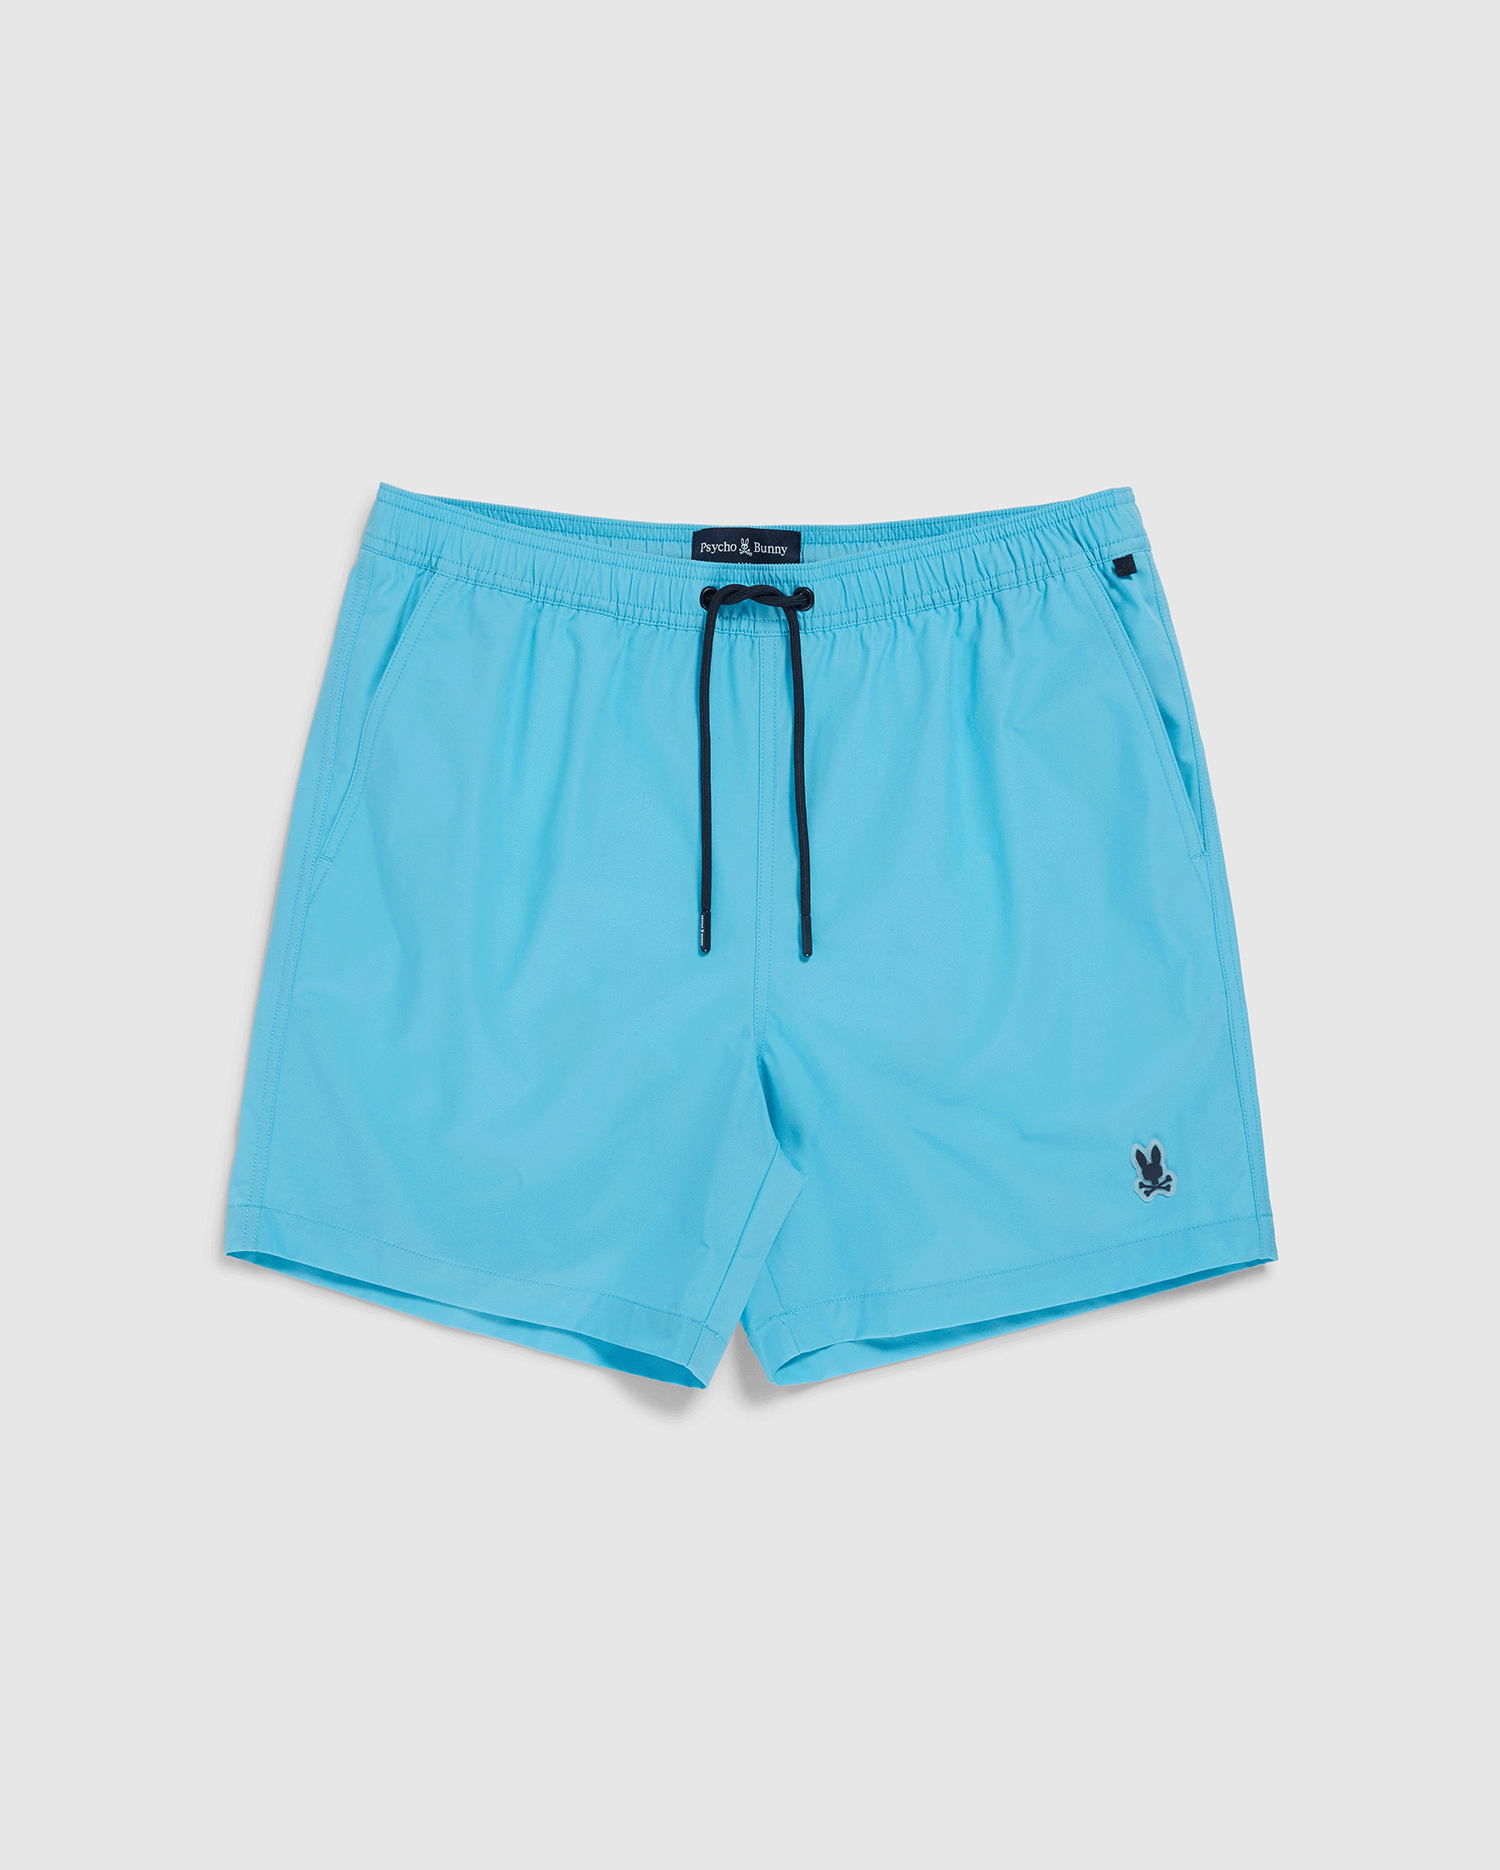 Light blue Psycho Bunny hydrochromic swim shorts with a dark blue drawstring and a small black logo on the lower left leg, displayed against a plain white background.